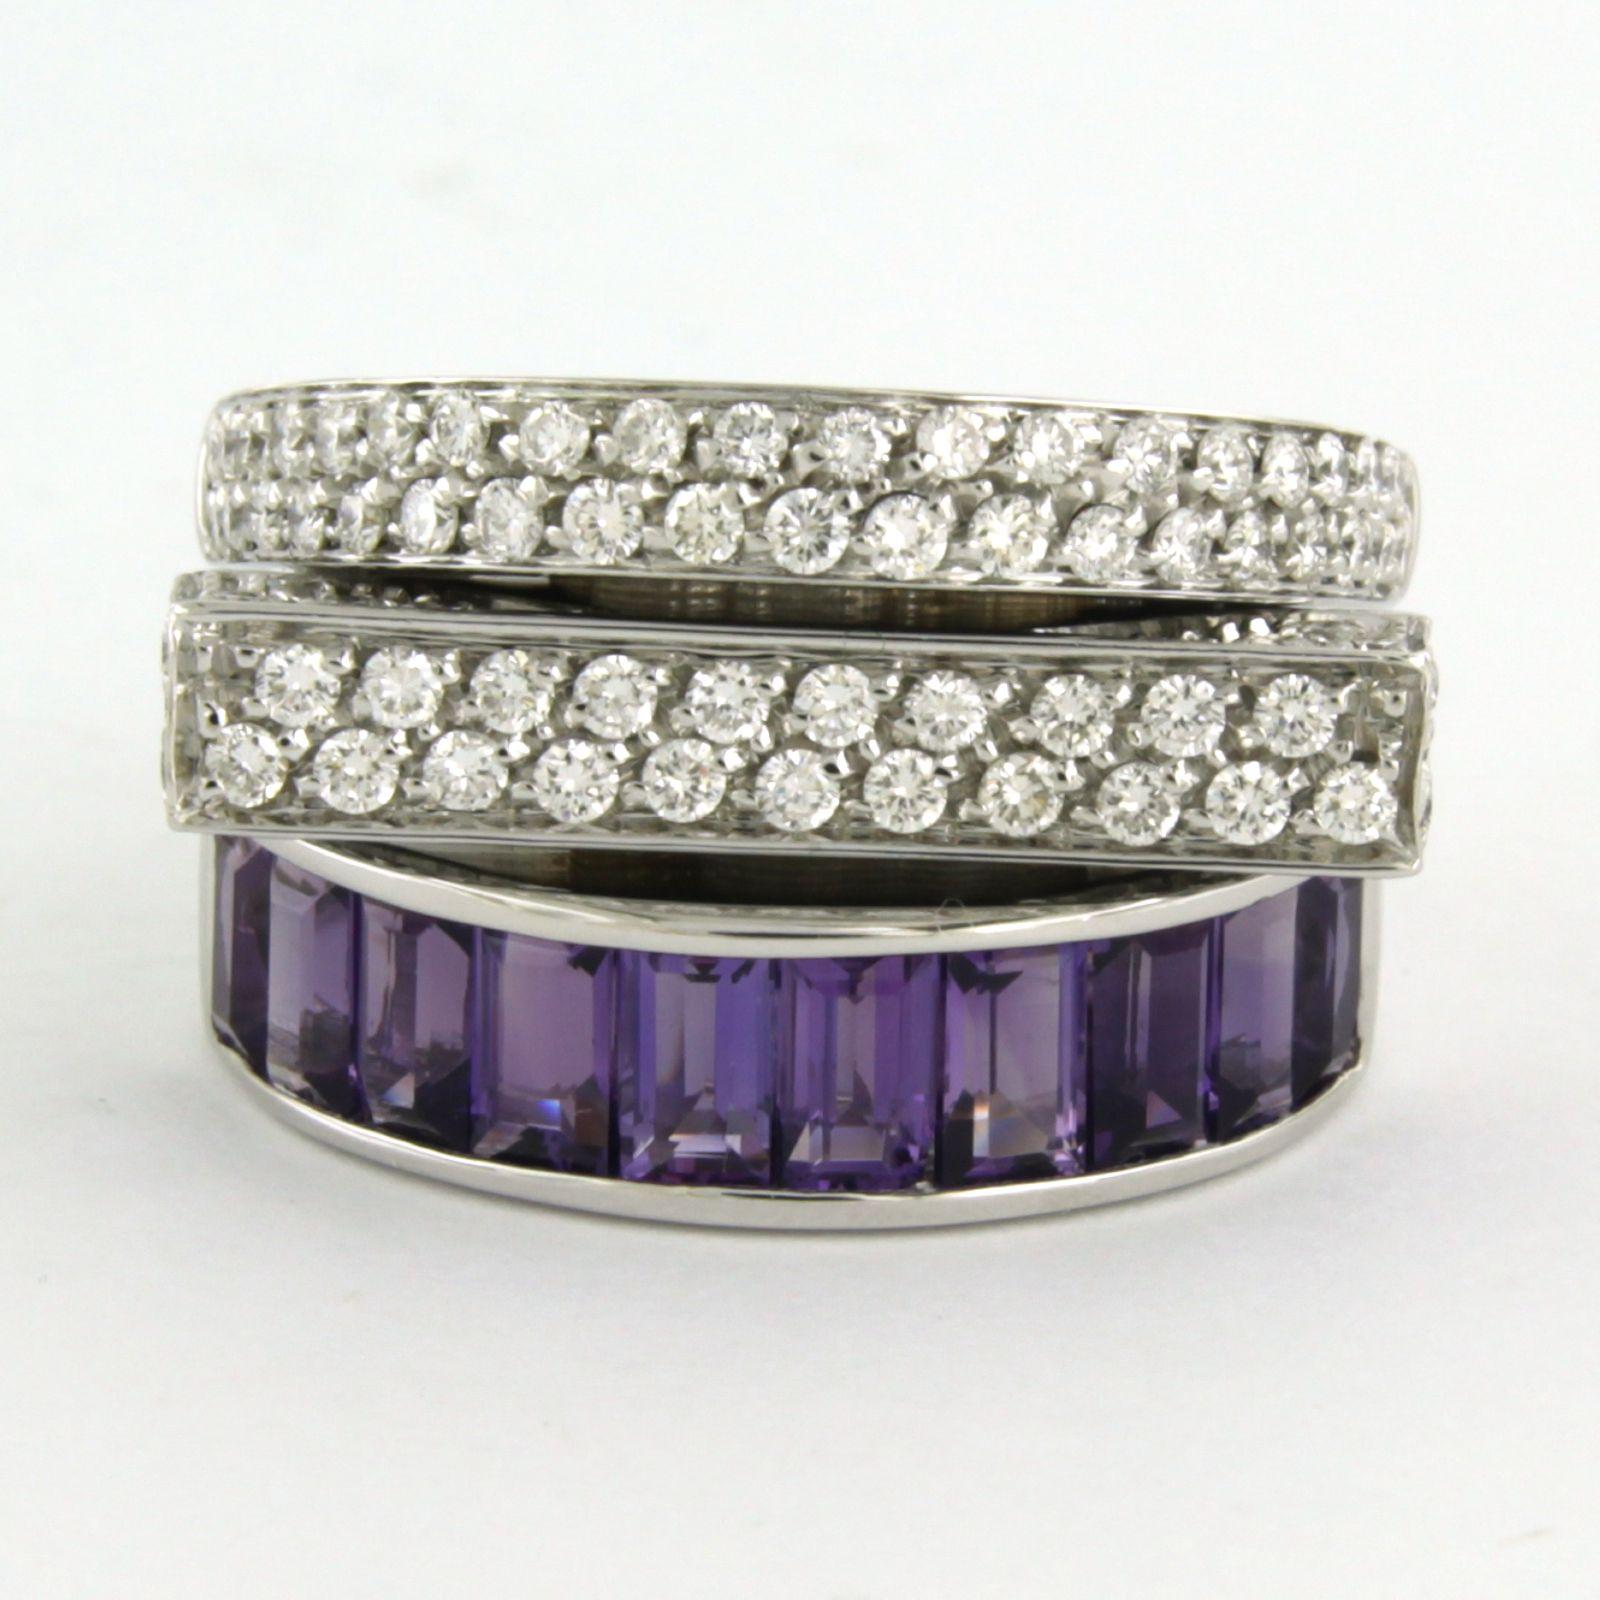 18k white gold ring set with amethyst and brilliant cut diamond. 1.80ct - F/G - VS/SI - ring size U.S. 7 – EU. 17.25(54)

detailed description:

The top of the ring is 1.6 cm wide by 6.7 mm high

Ring size US 7 – EU. 17.25(54), ring can be enlarged